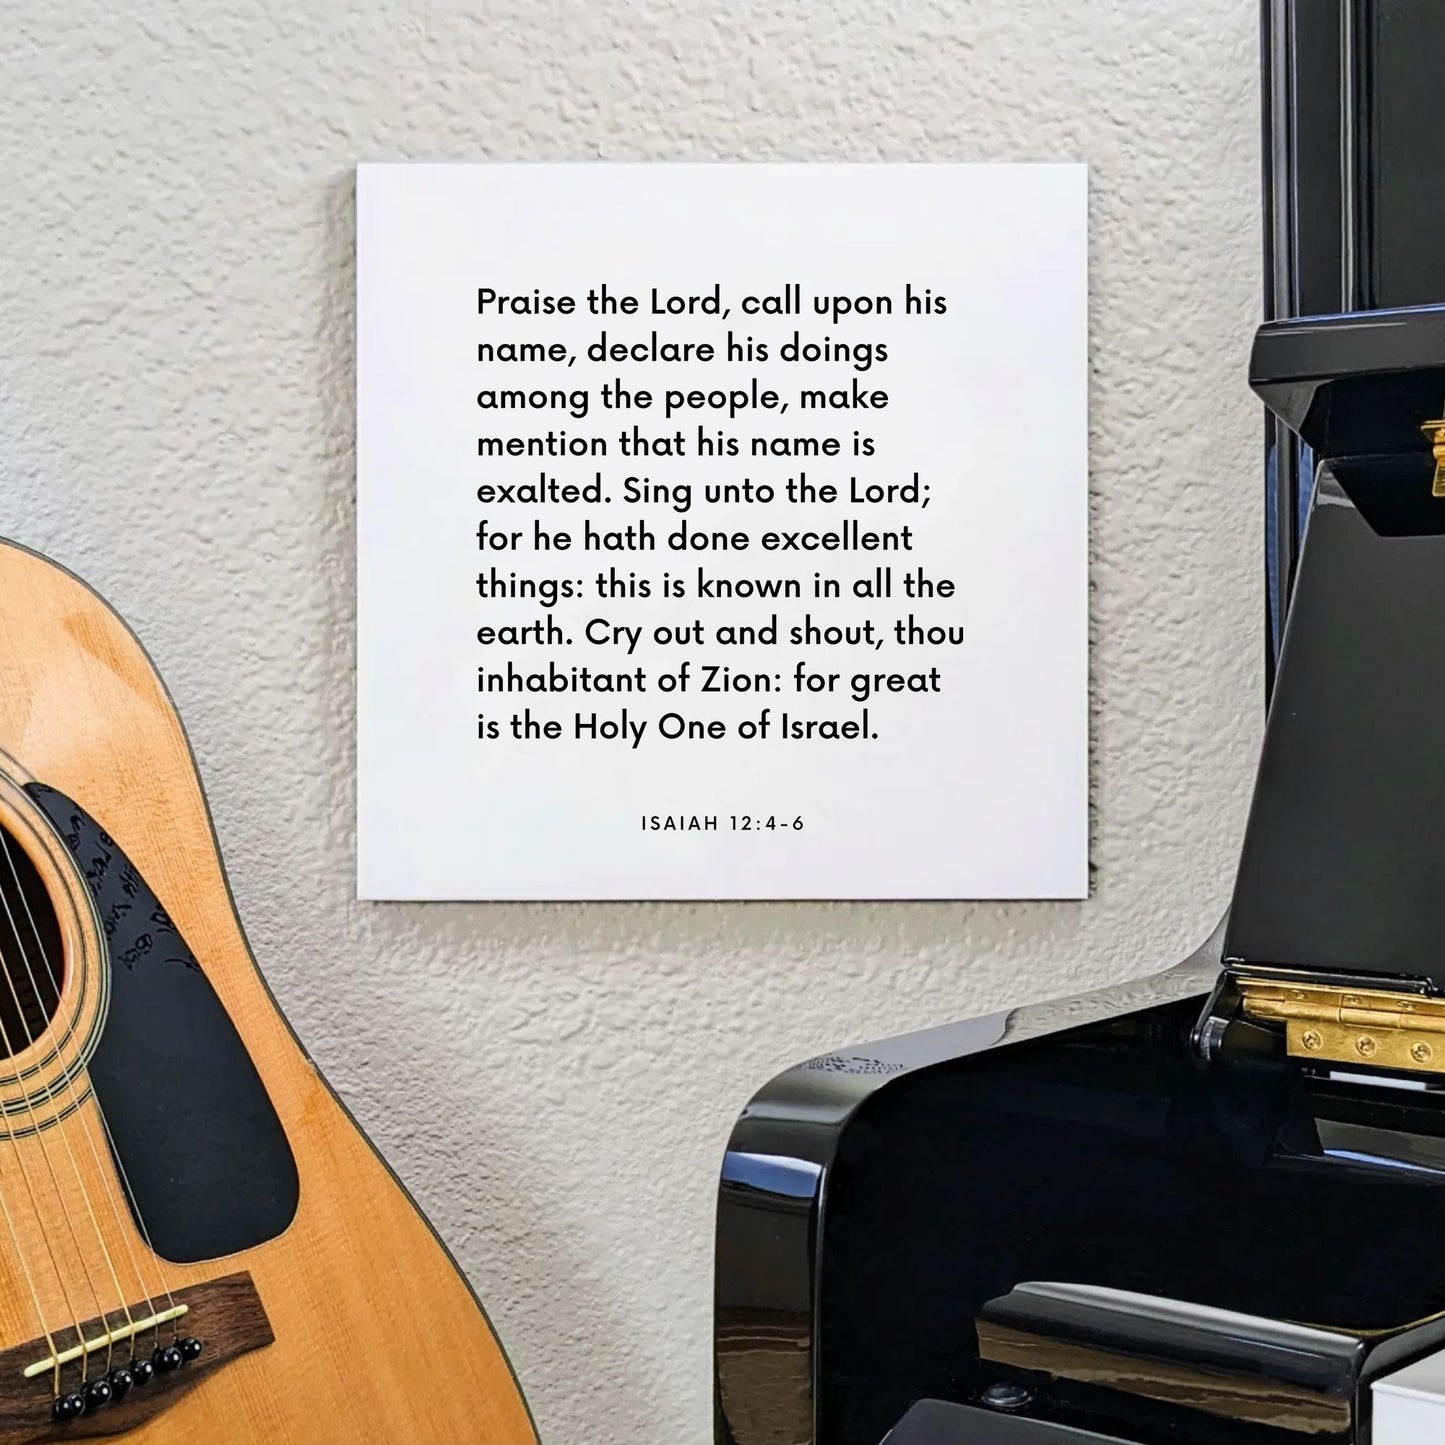 Music mouting of the scripture tile for Isaiah 12:4-6 - "Praise the Lord, call upon his name"